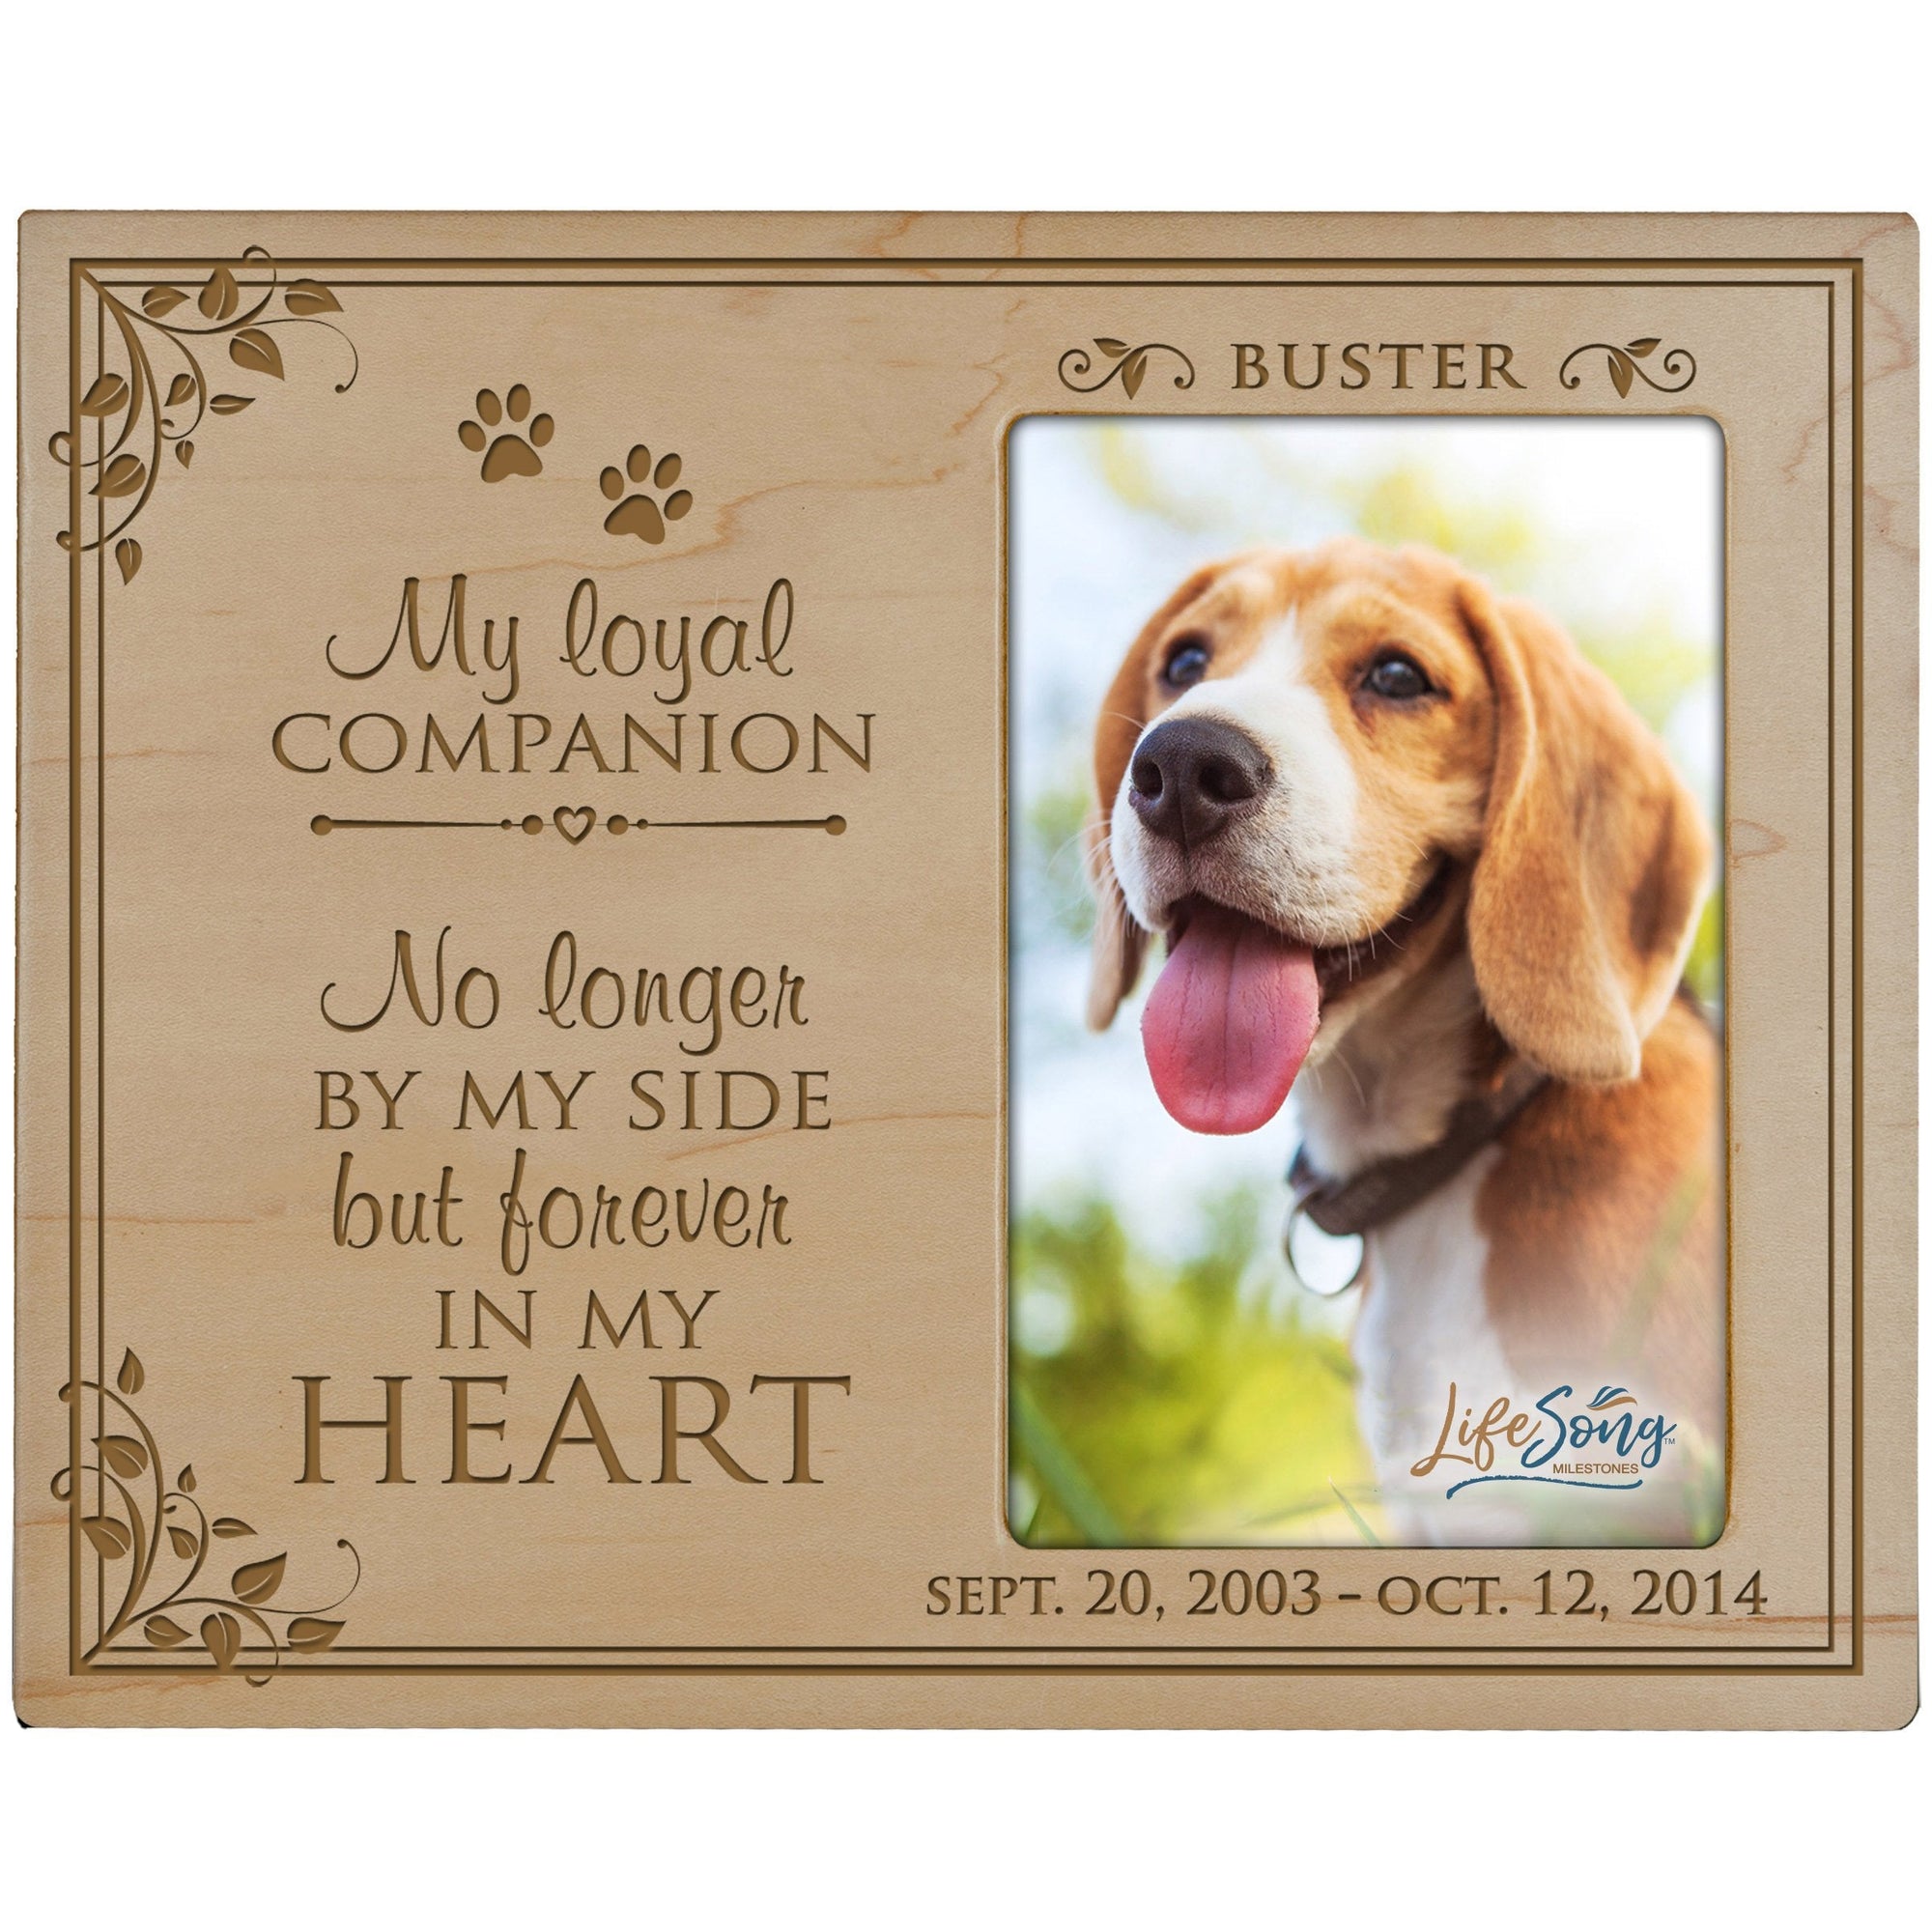 8x10 Maple Pet Memorial Picture Frame with the phrase "My Loyal Companion"